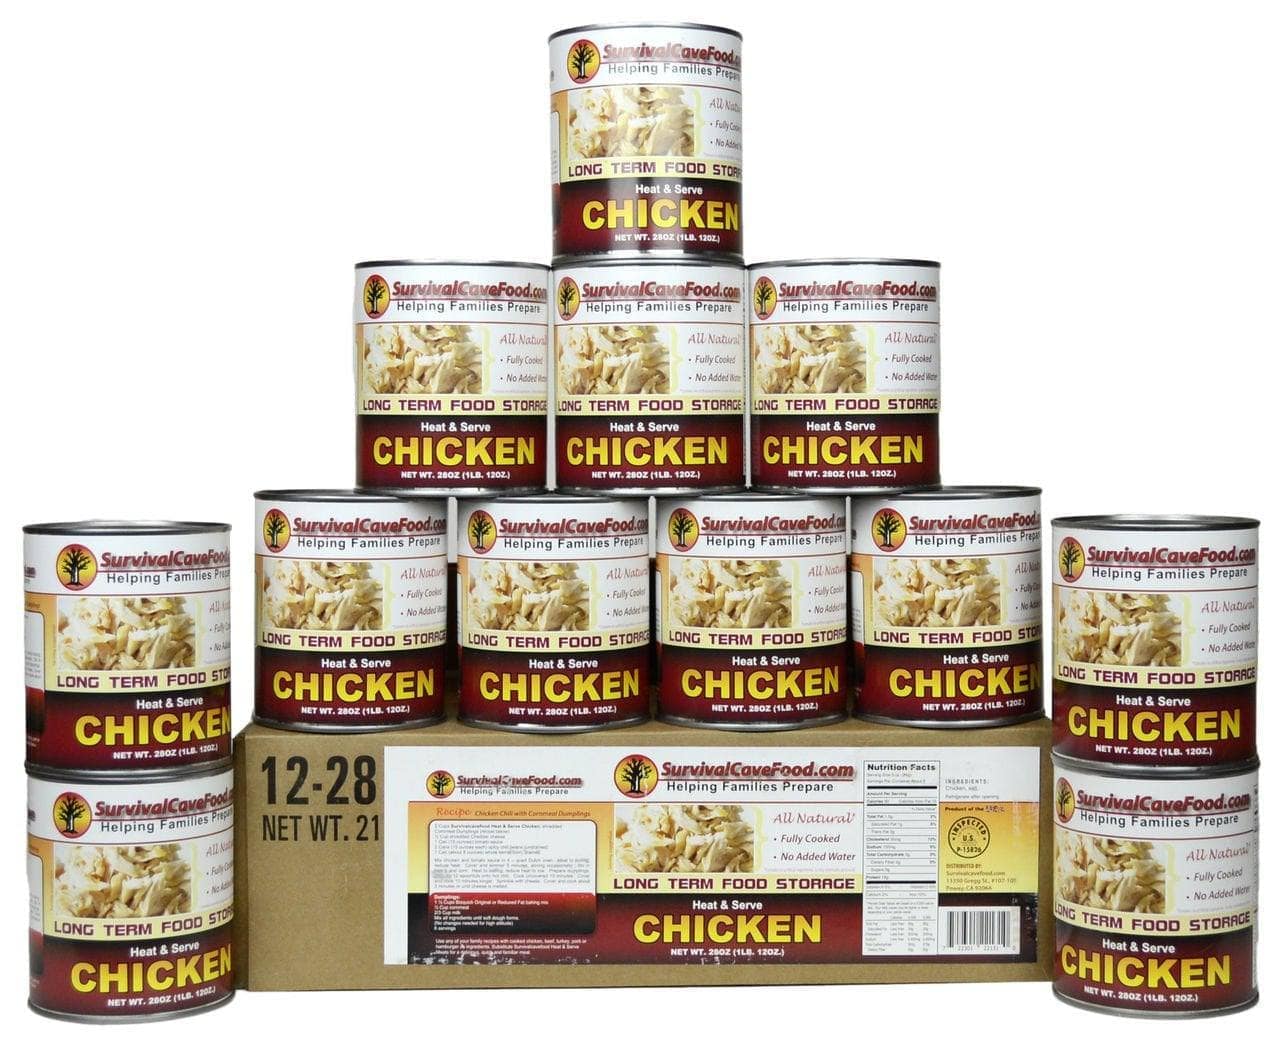 survival-food-freeze-dried-food-survival-cave-food-scfck-canned-chicken-12-cans-1-case-28642141667410 image